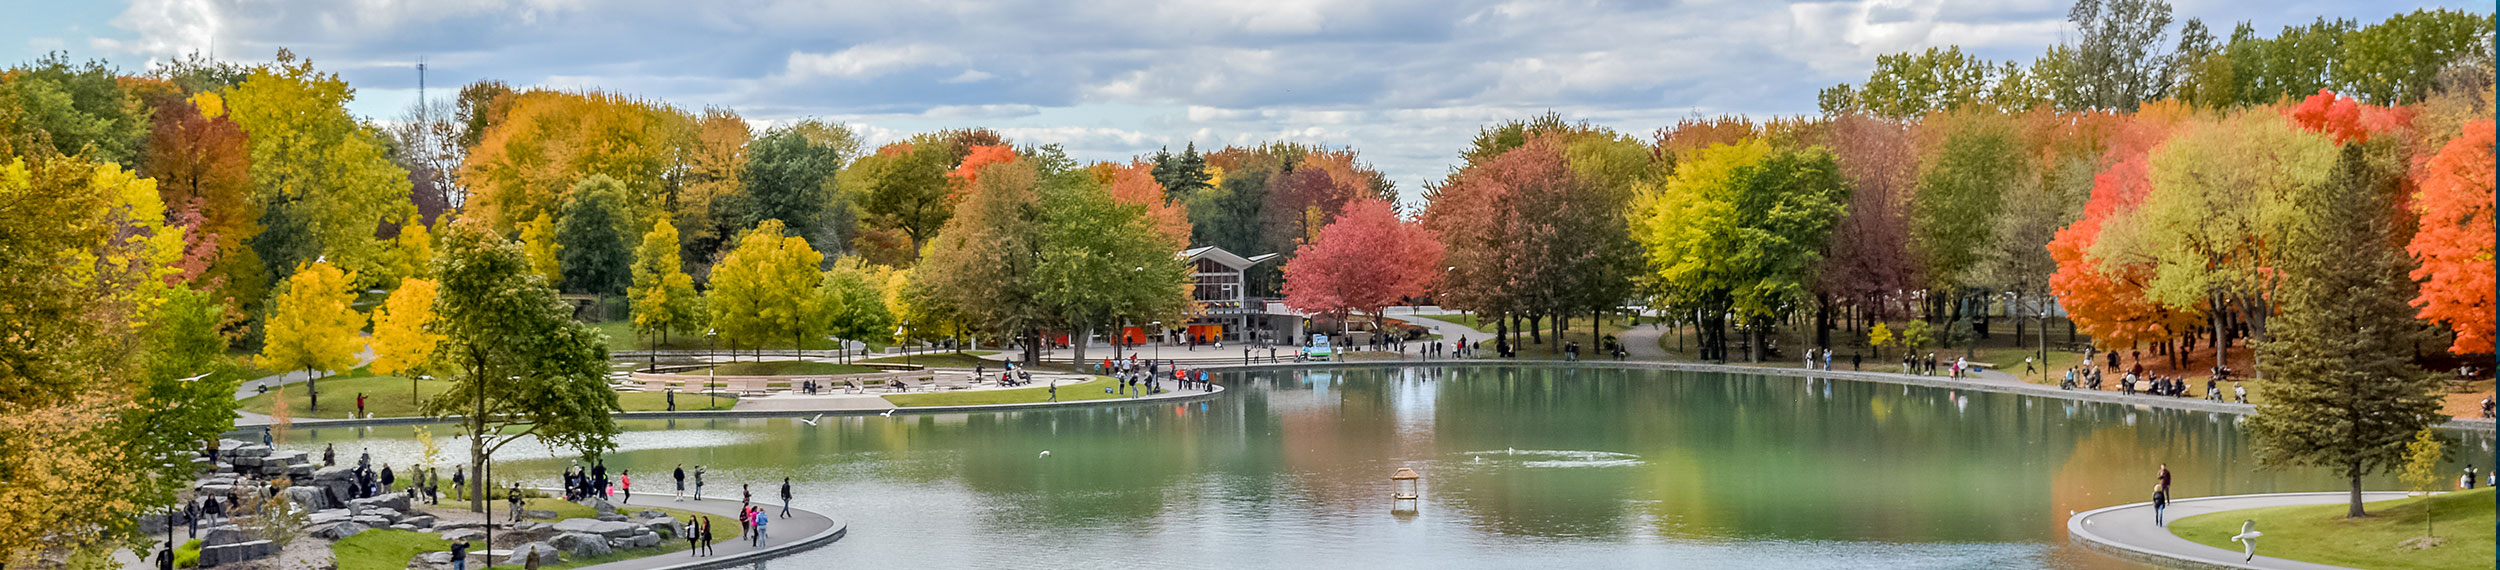 Autumn leaves near a lake in the Mount-Royal area of Montreal, British Columbia, Canada. 